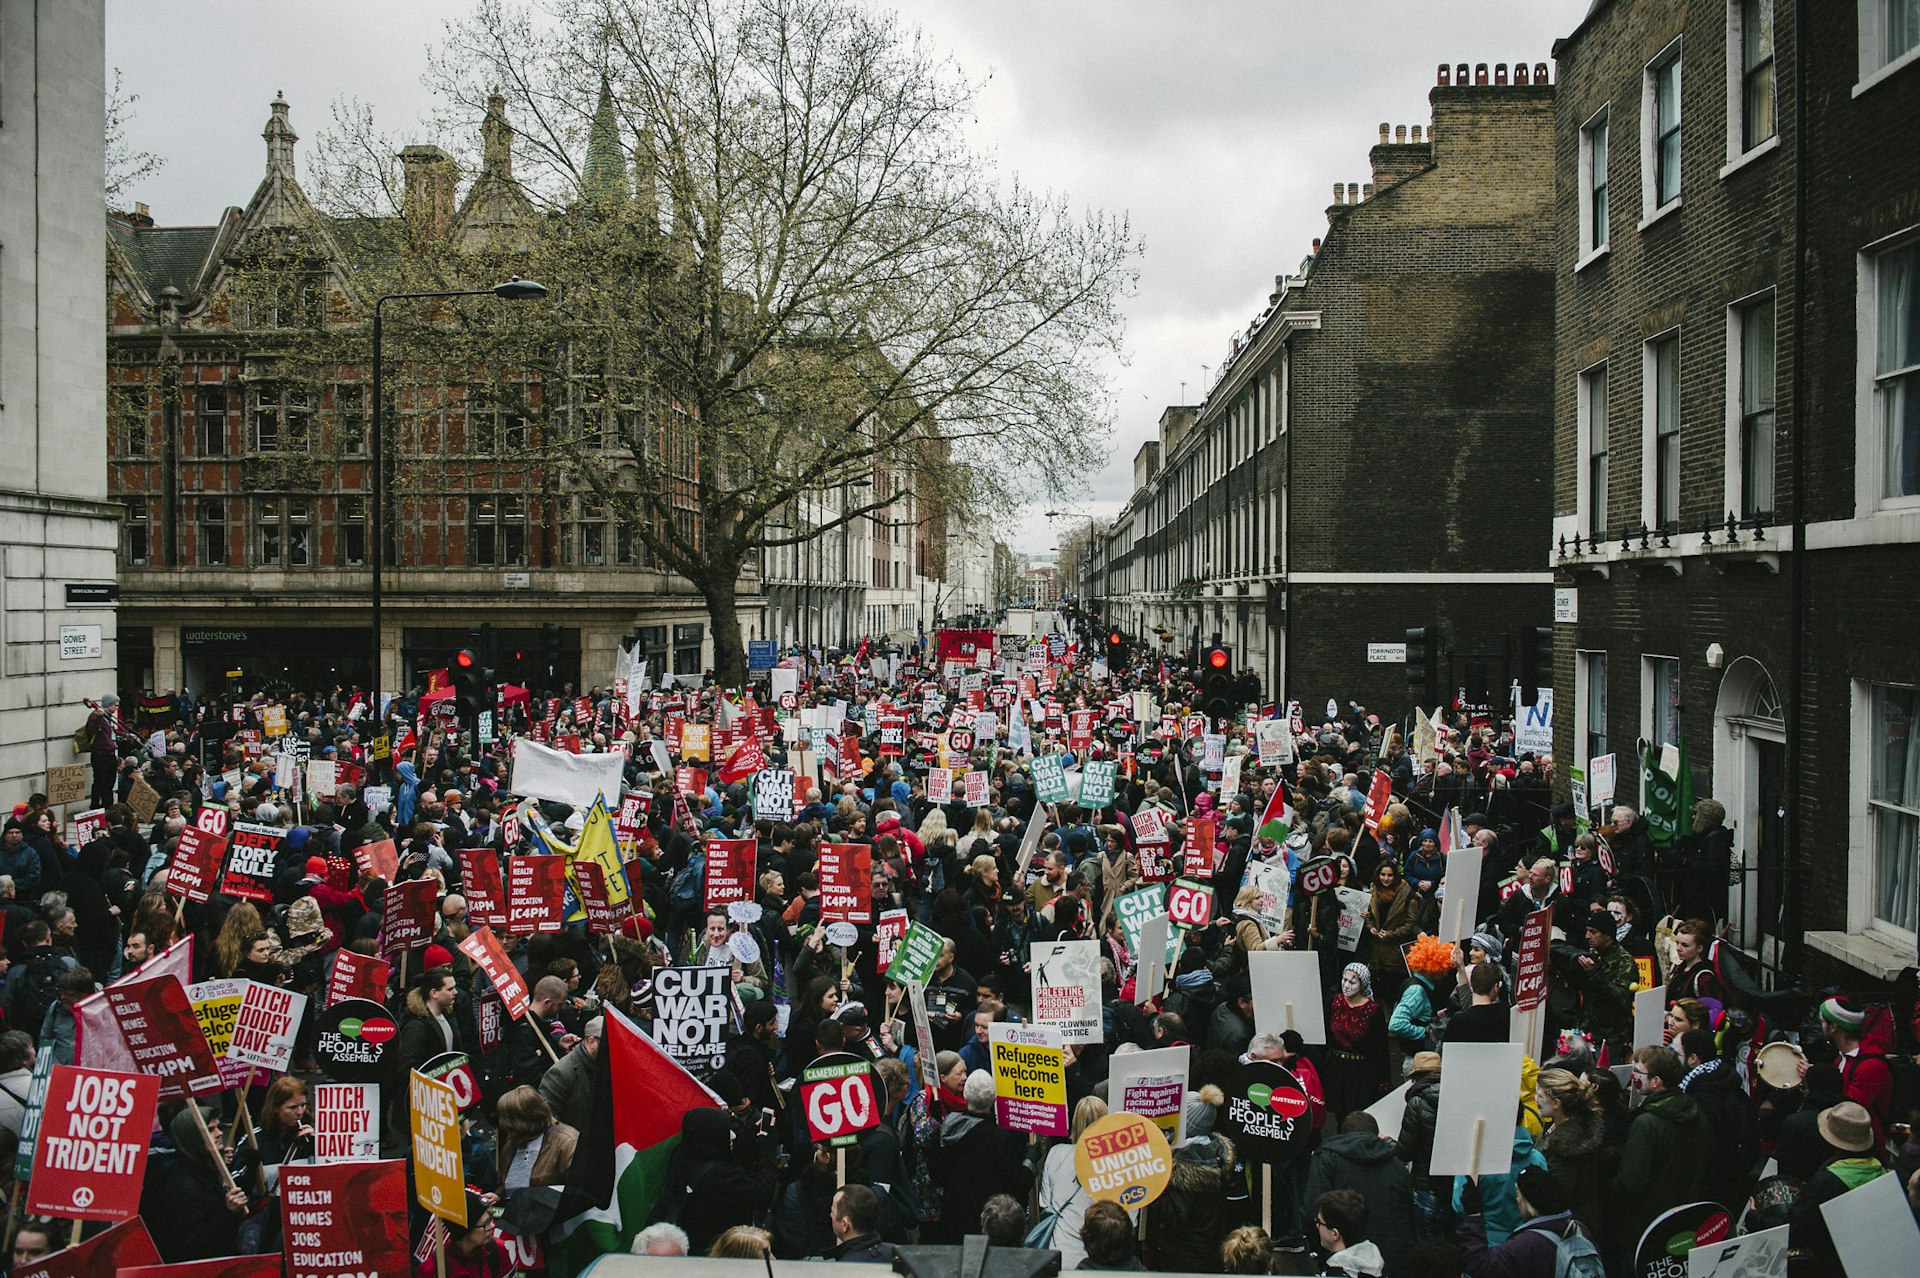 Tens of thousands march through London to demand an end to austerity